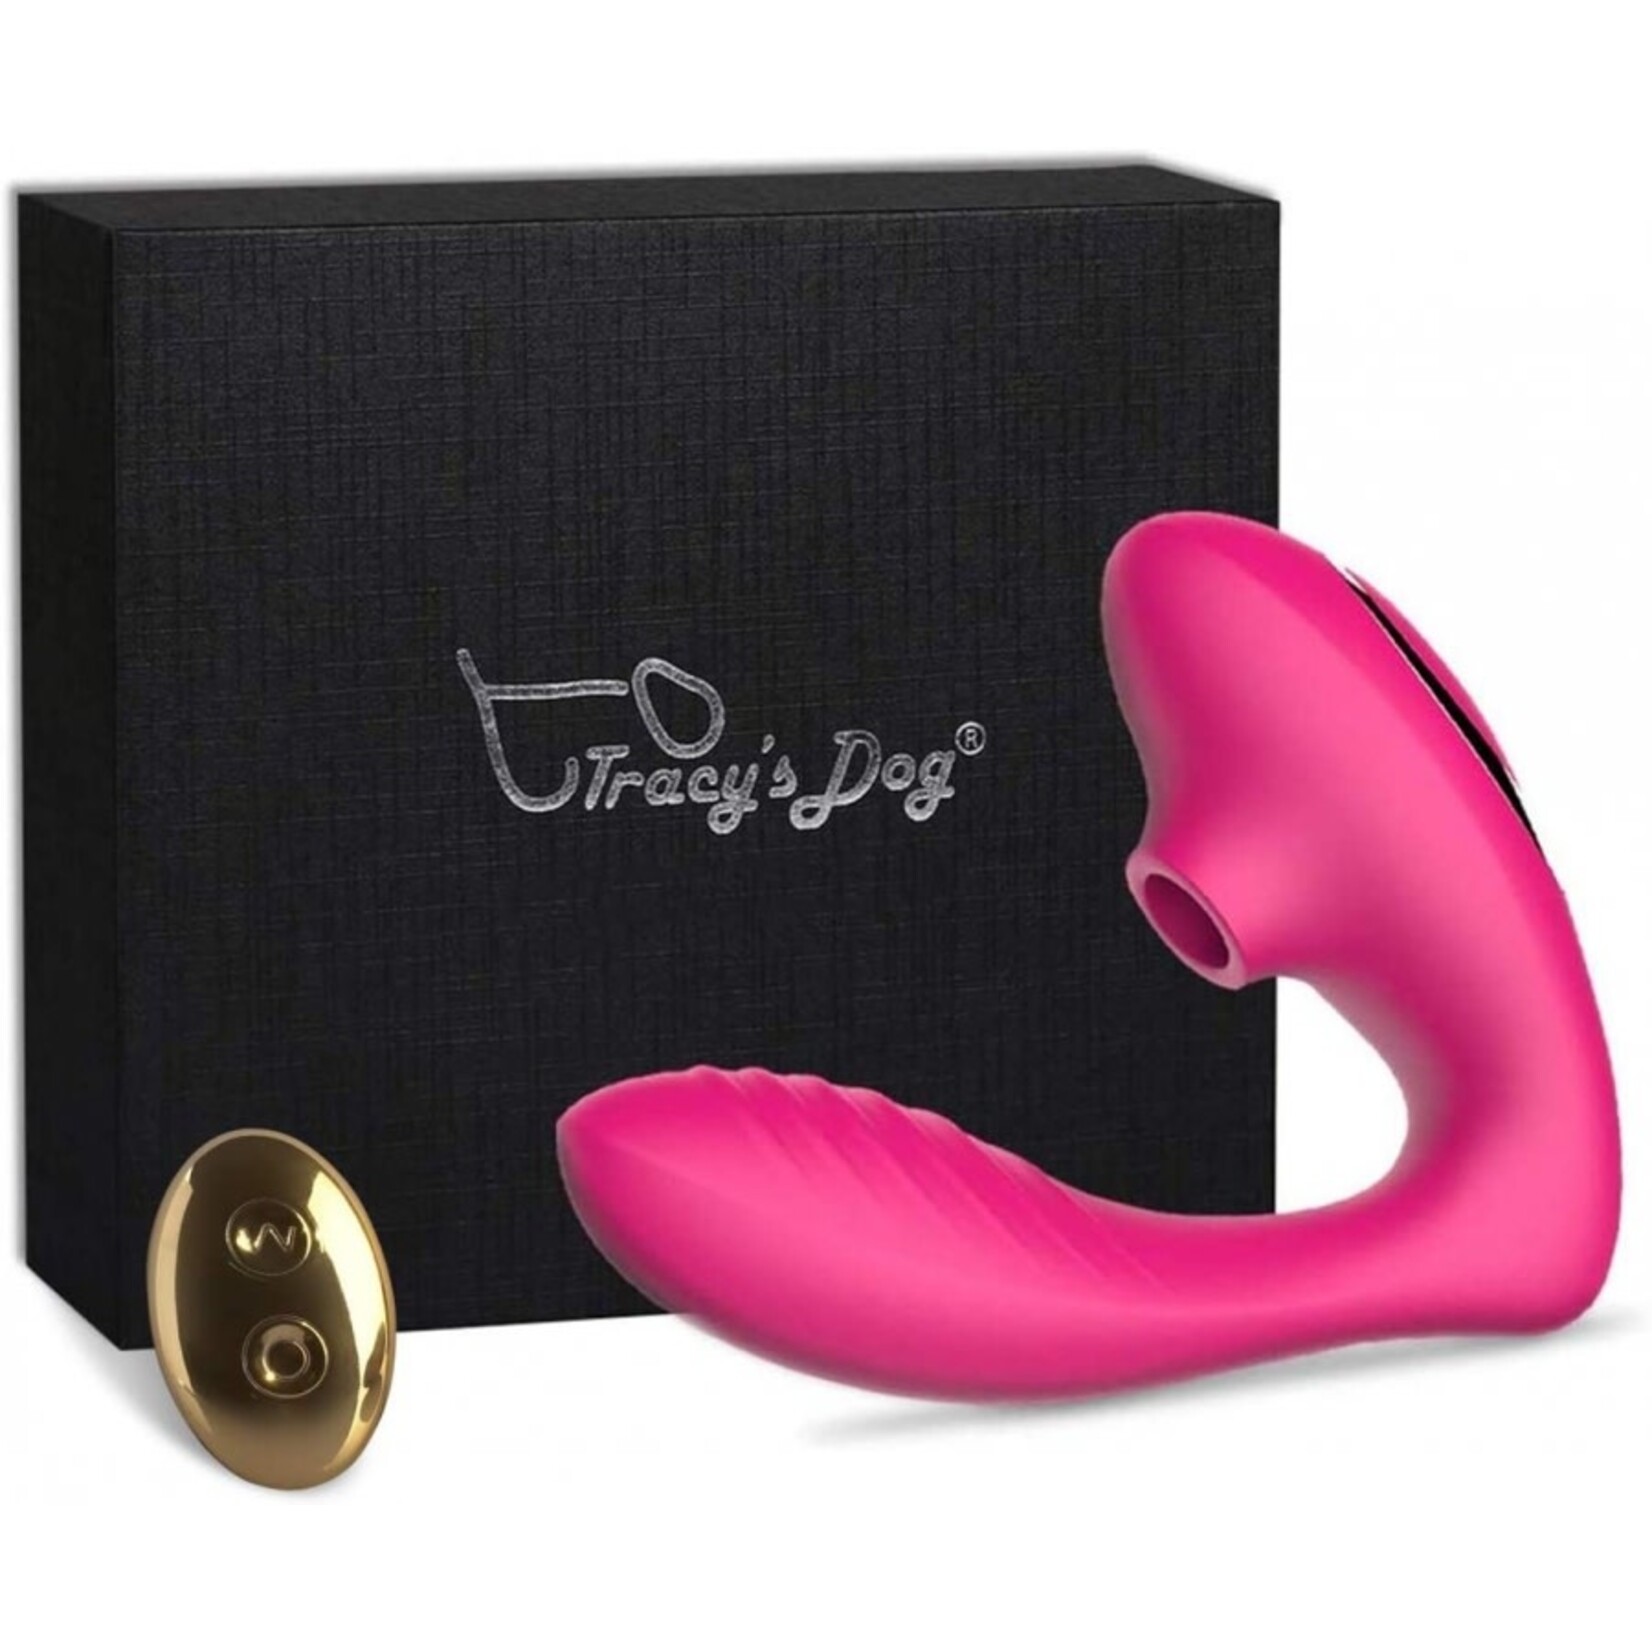 TRACY'S DOG TRACY'S DOG - OG CLITORAL SUCKING VIBRATOR WITH REMOTE - PINK - PRO 2